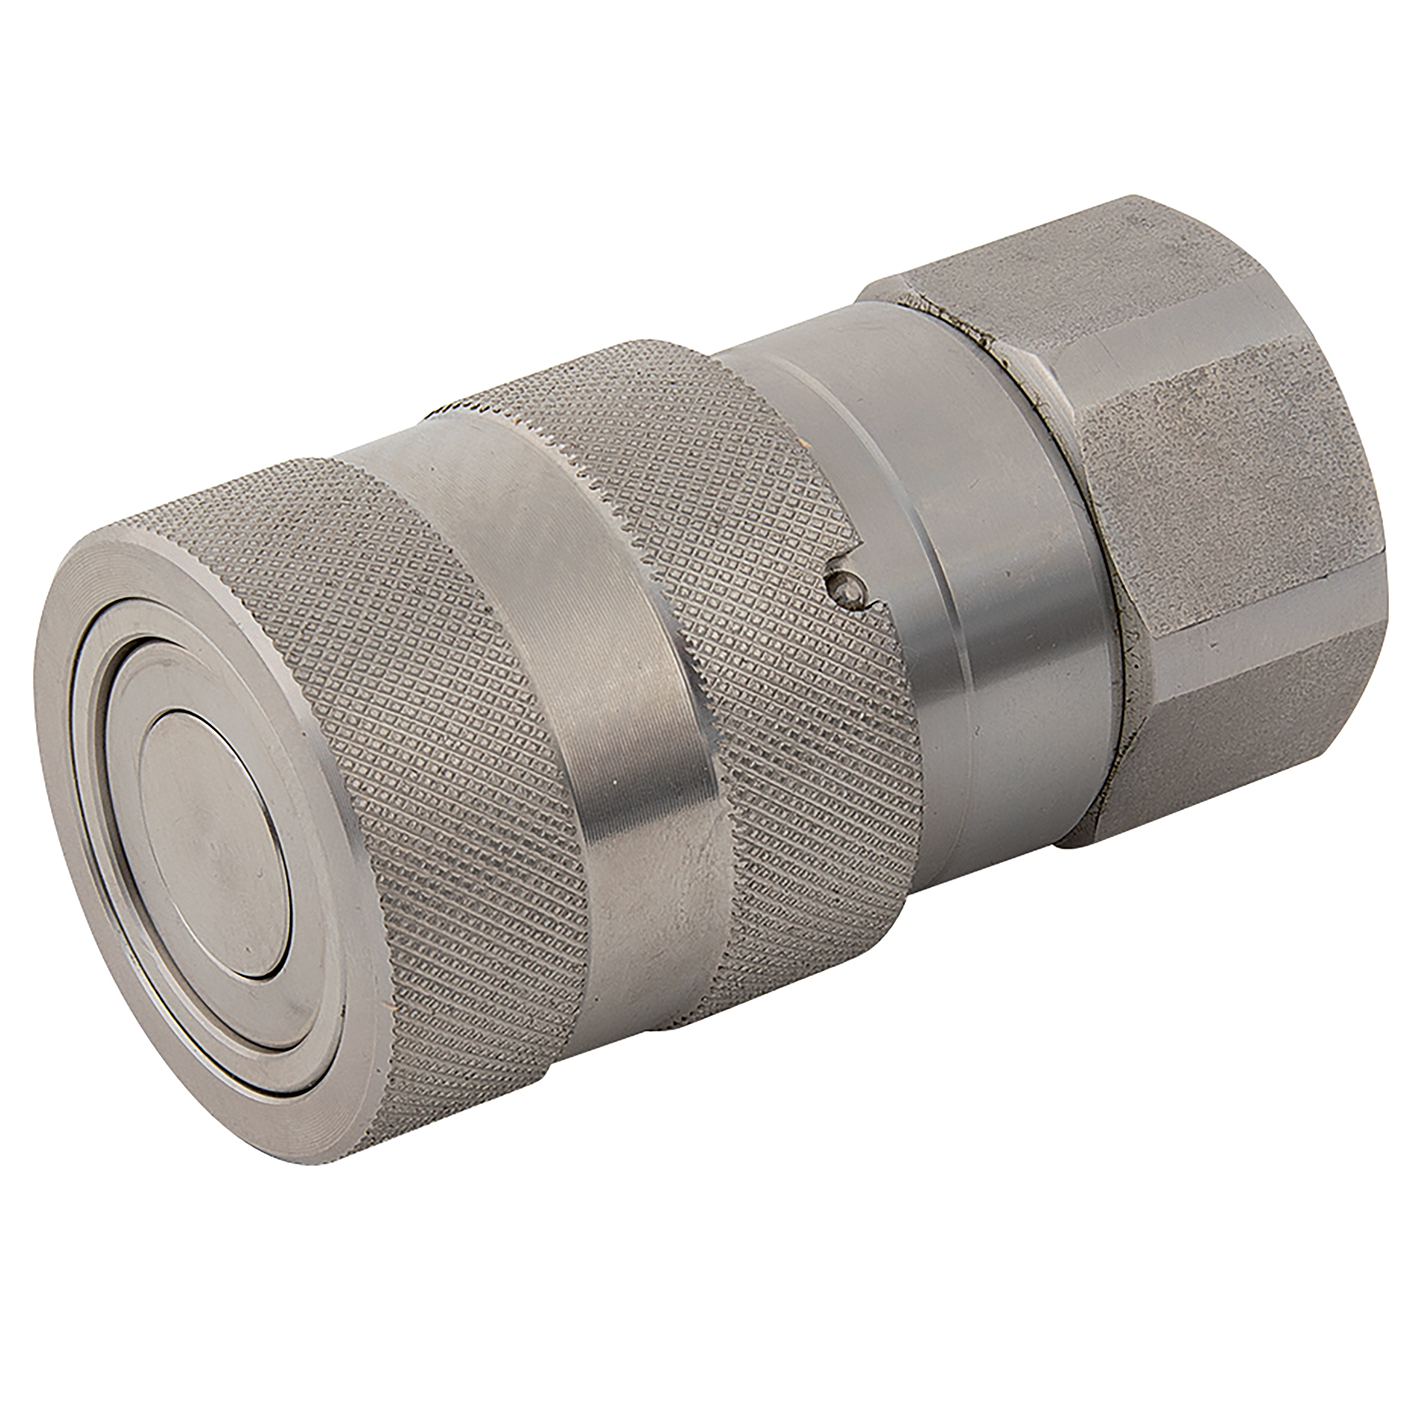 1/2" BSPP Female Flat Faced Coupling